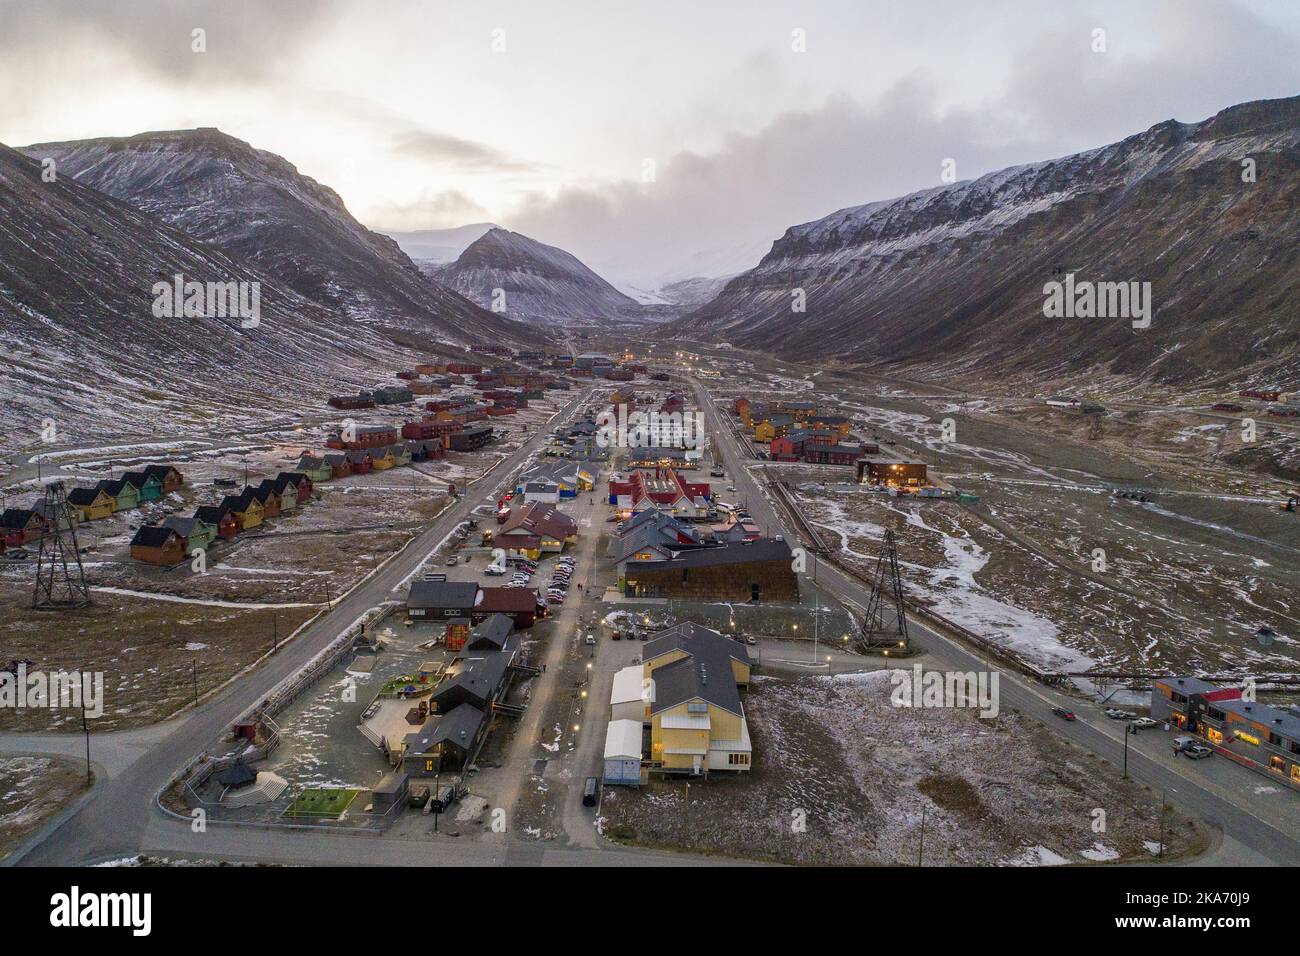 Longyearbyen, Svalbard, Norway 20171031. Longyearbyen on Svalbard is surrounded by mountains along The Advent Valley. Photo: Tore Meek / NTB scanpi Stock Photo